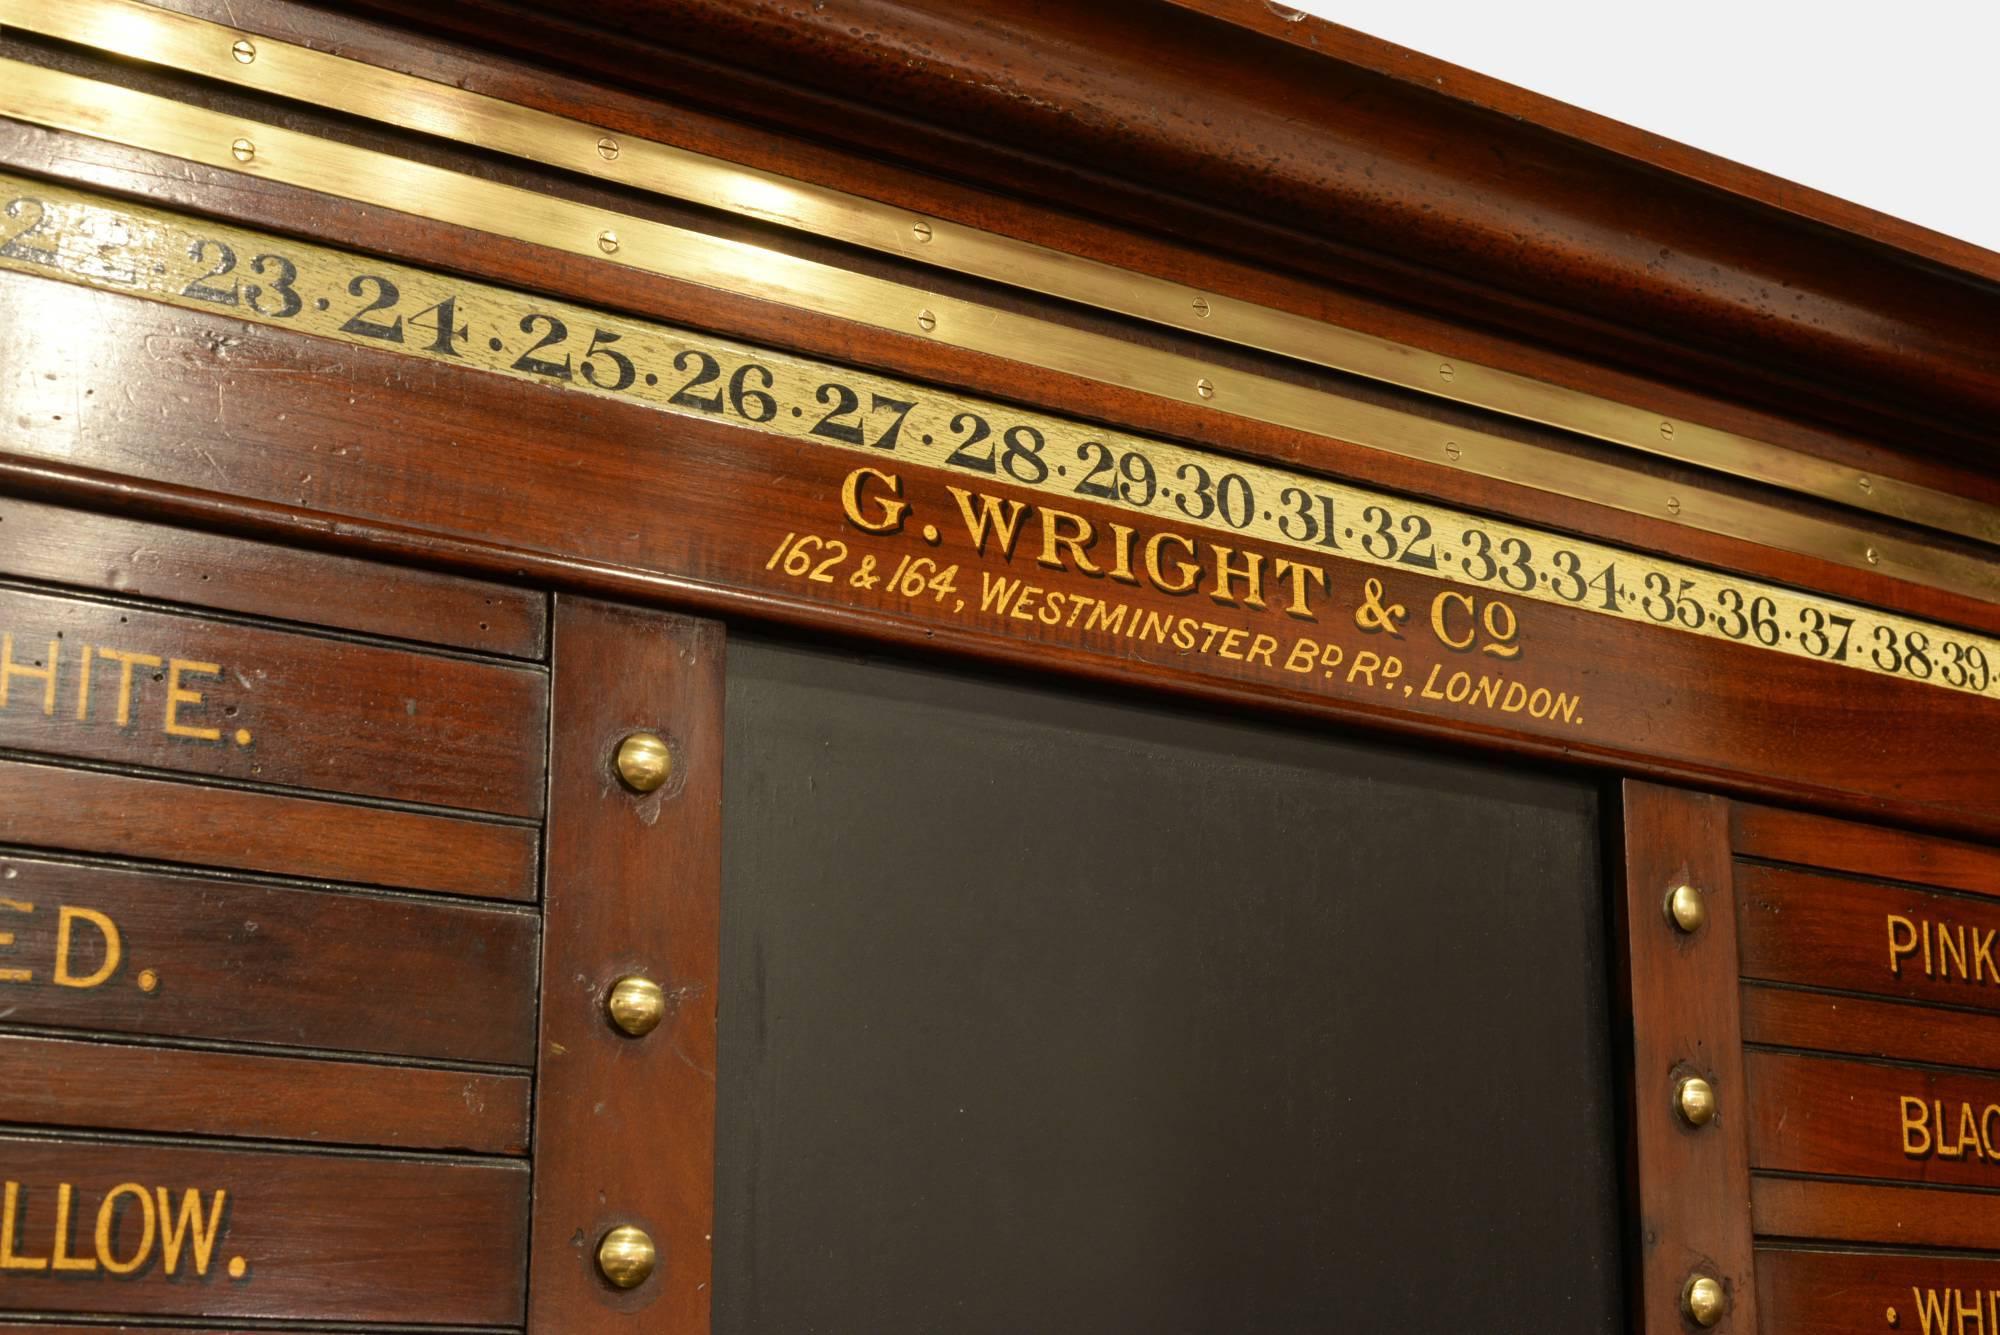 Victorian life pool and billiards scoreboard with ball cupboard. By George Wright & Co. London.
 